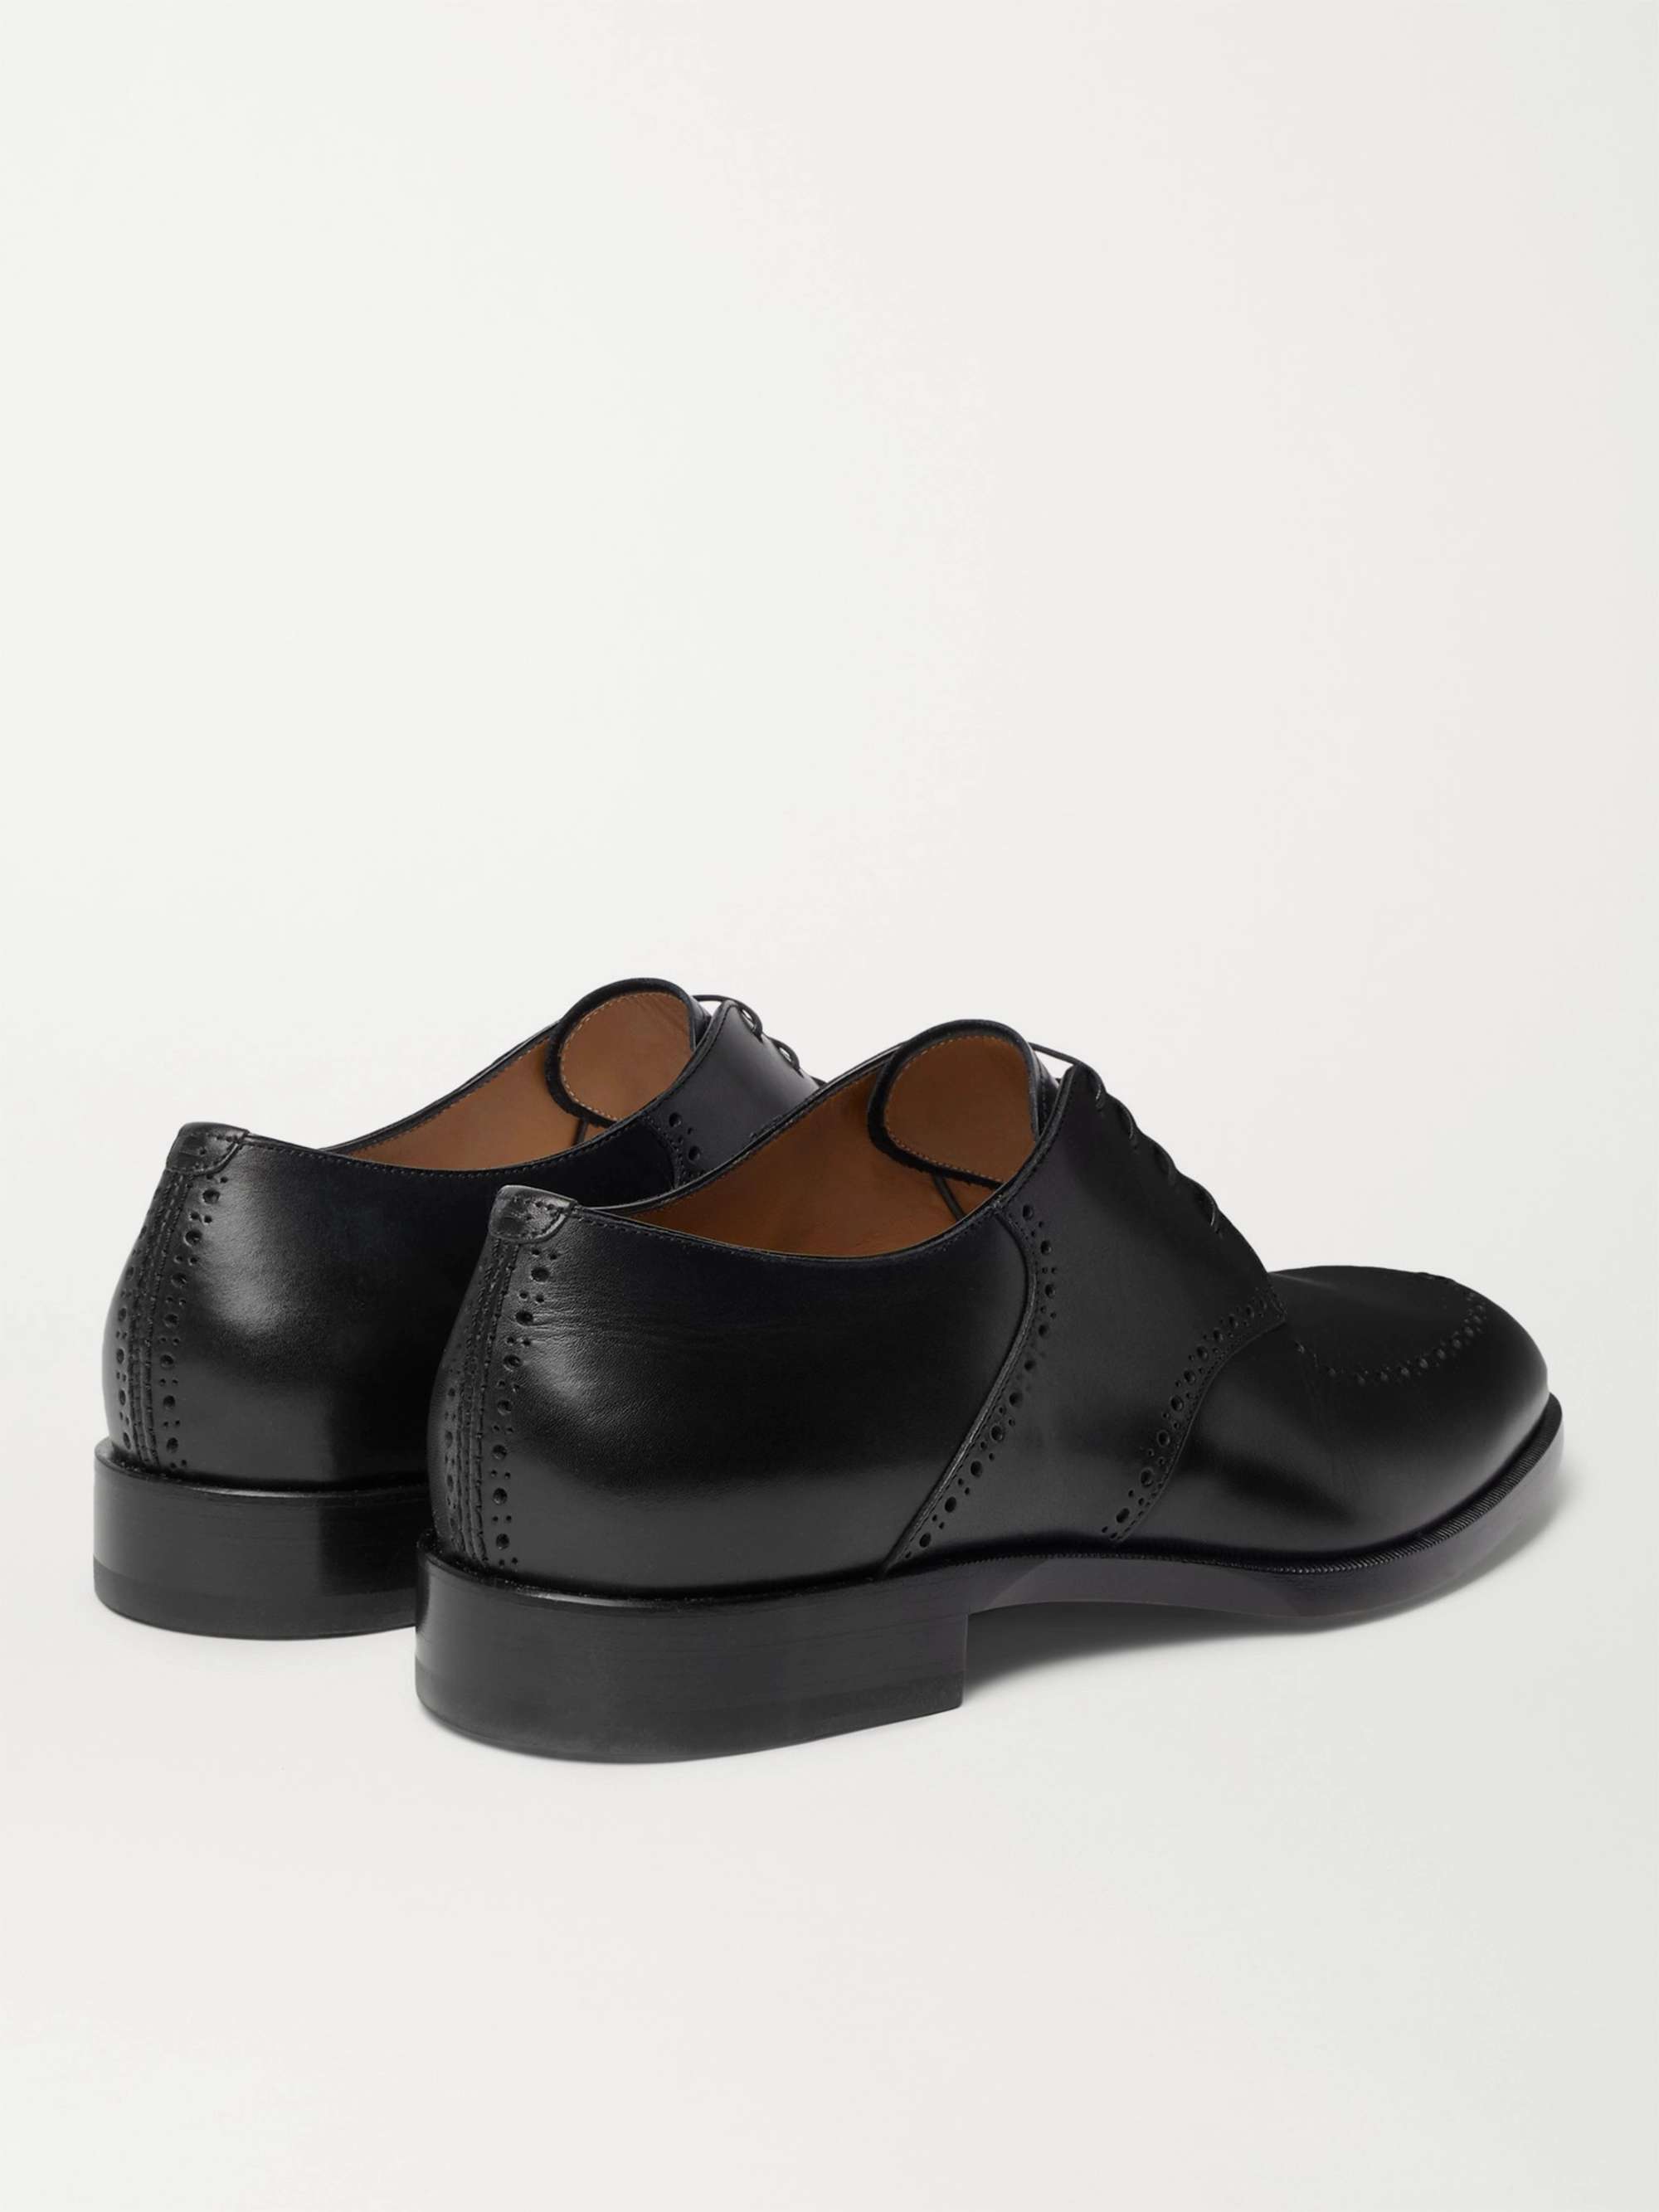 CHRISTIAN LOUBOUTIN A Mon Homme Leather Brogues